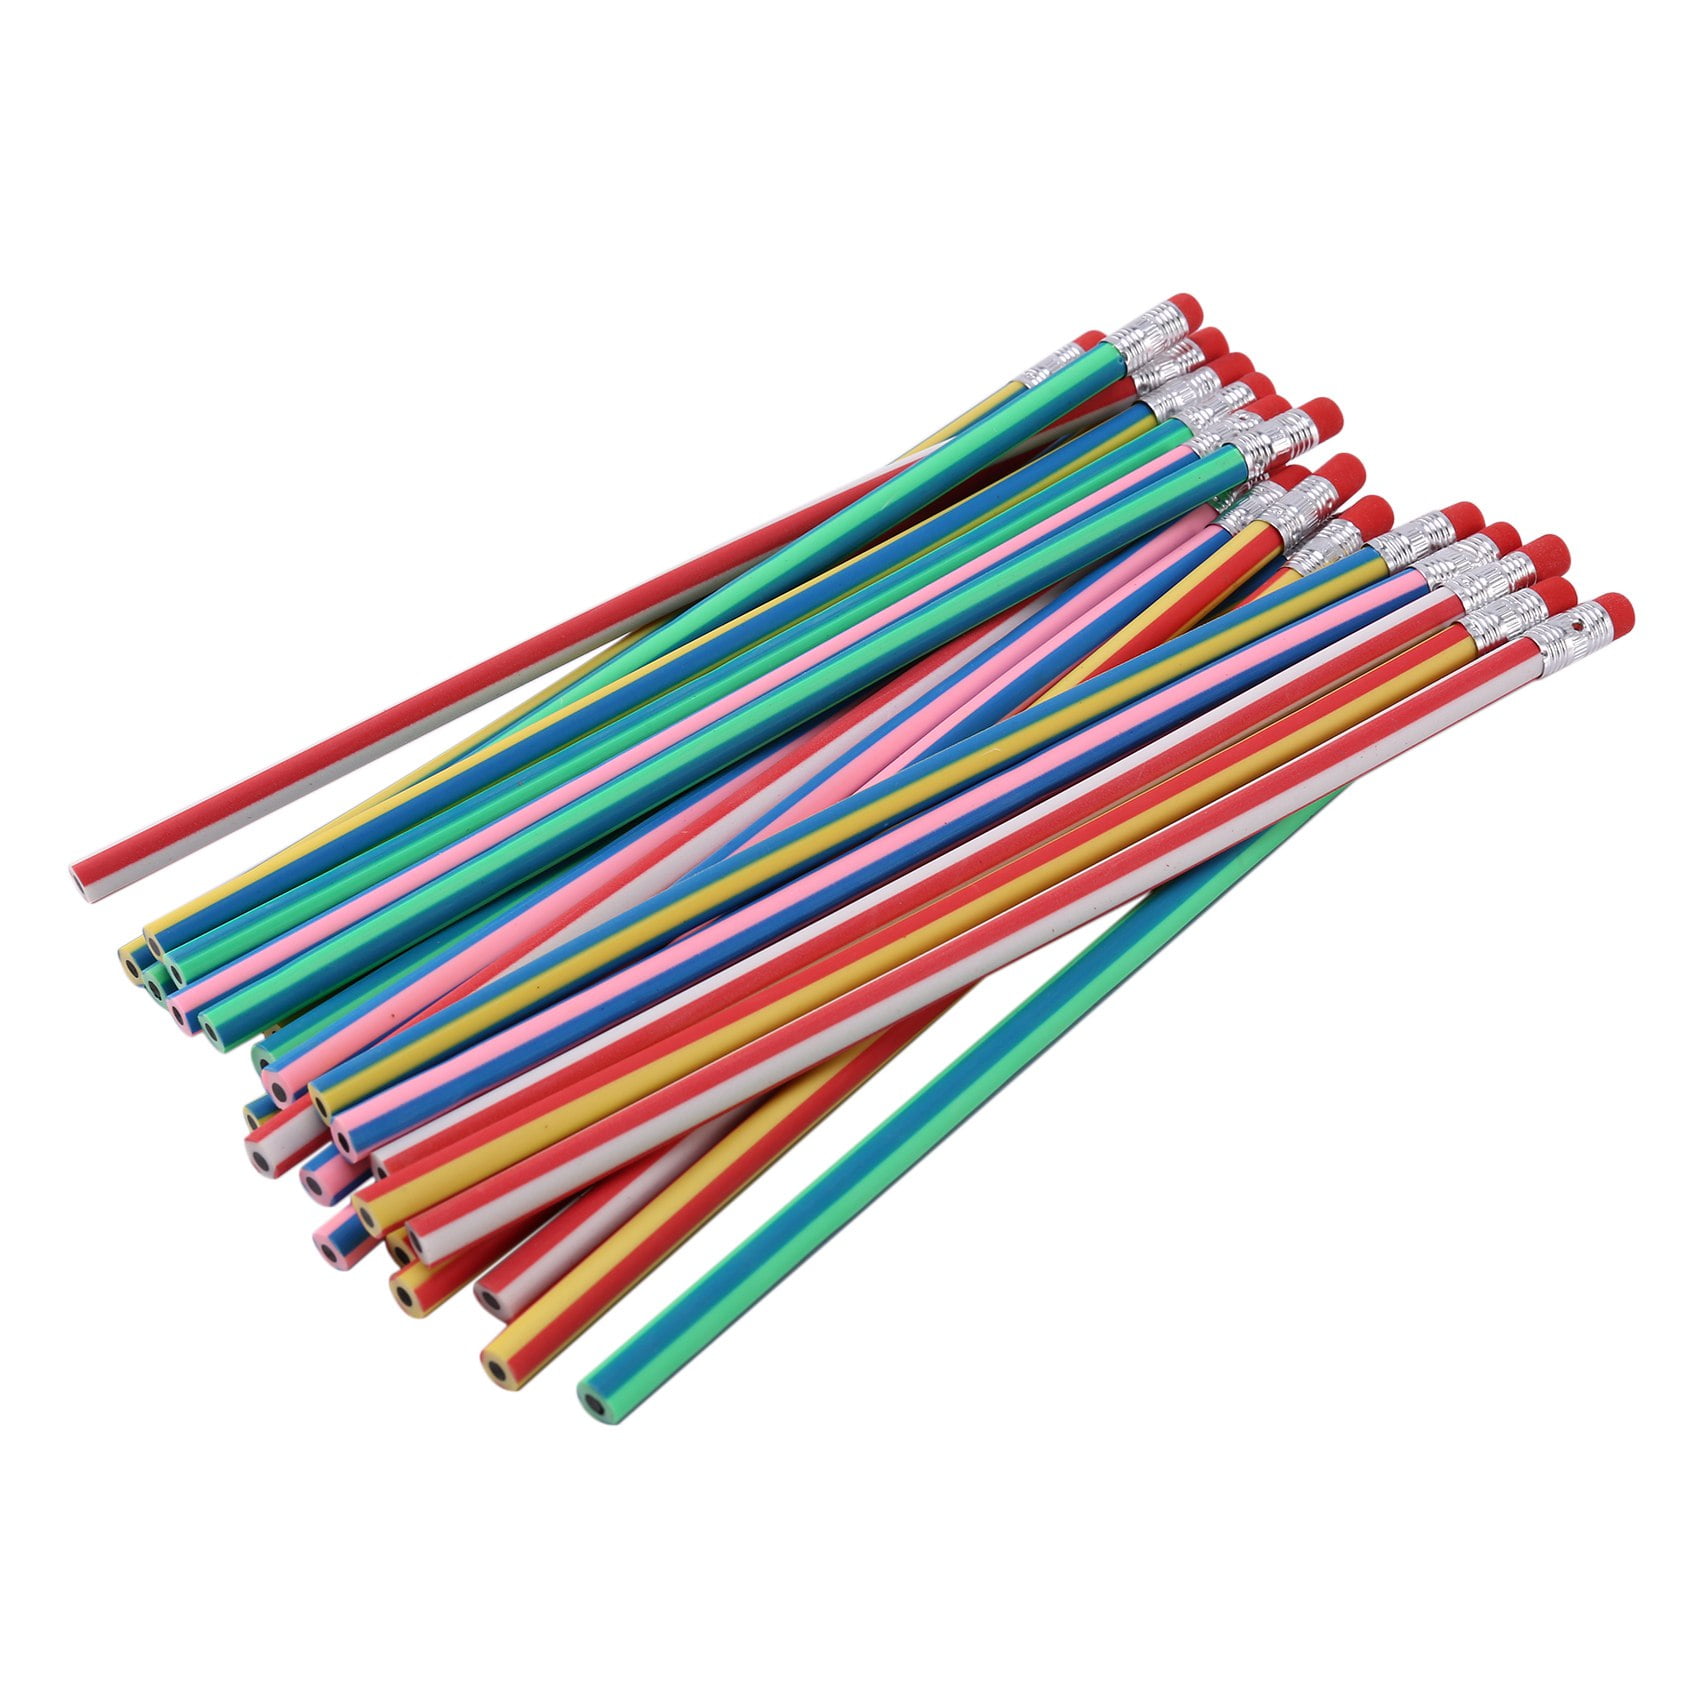 Generic 25 Pcs Soft Flexible Bendy Pencils Magic Bend Toys School  Stationary Equipment For Kids Party Bag Fillers Party Favor Supplies Funny  Gift Idea, Multicolored